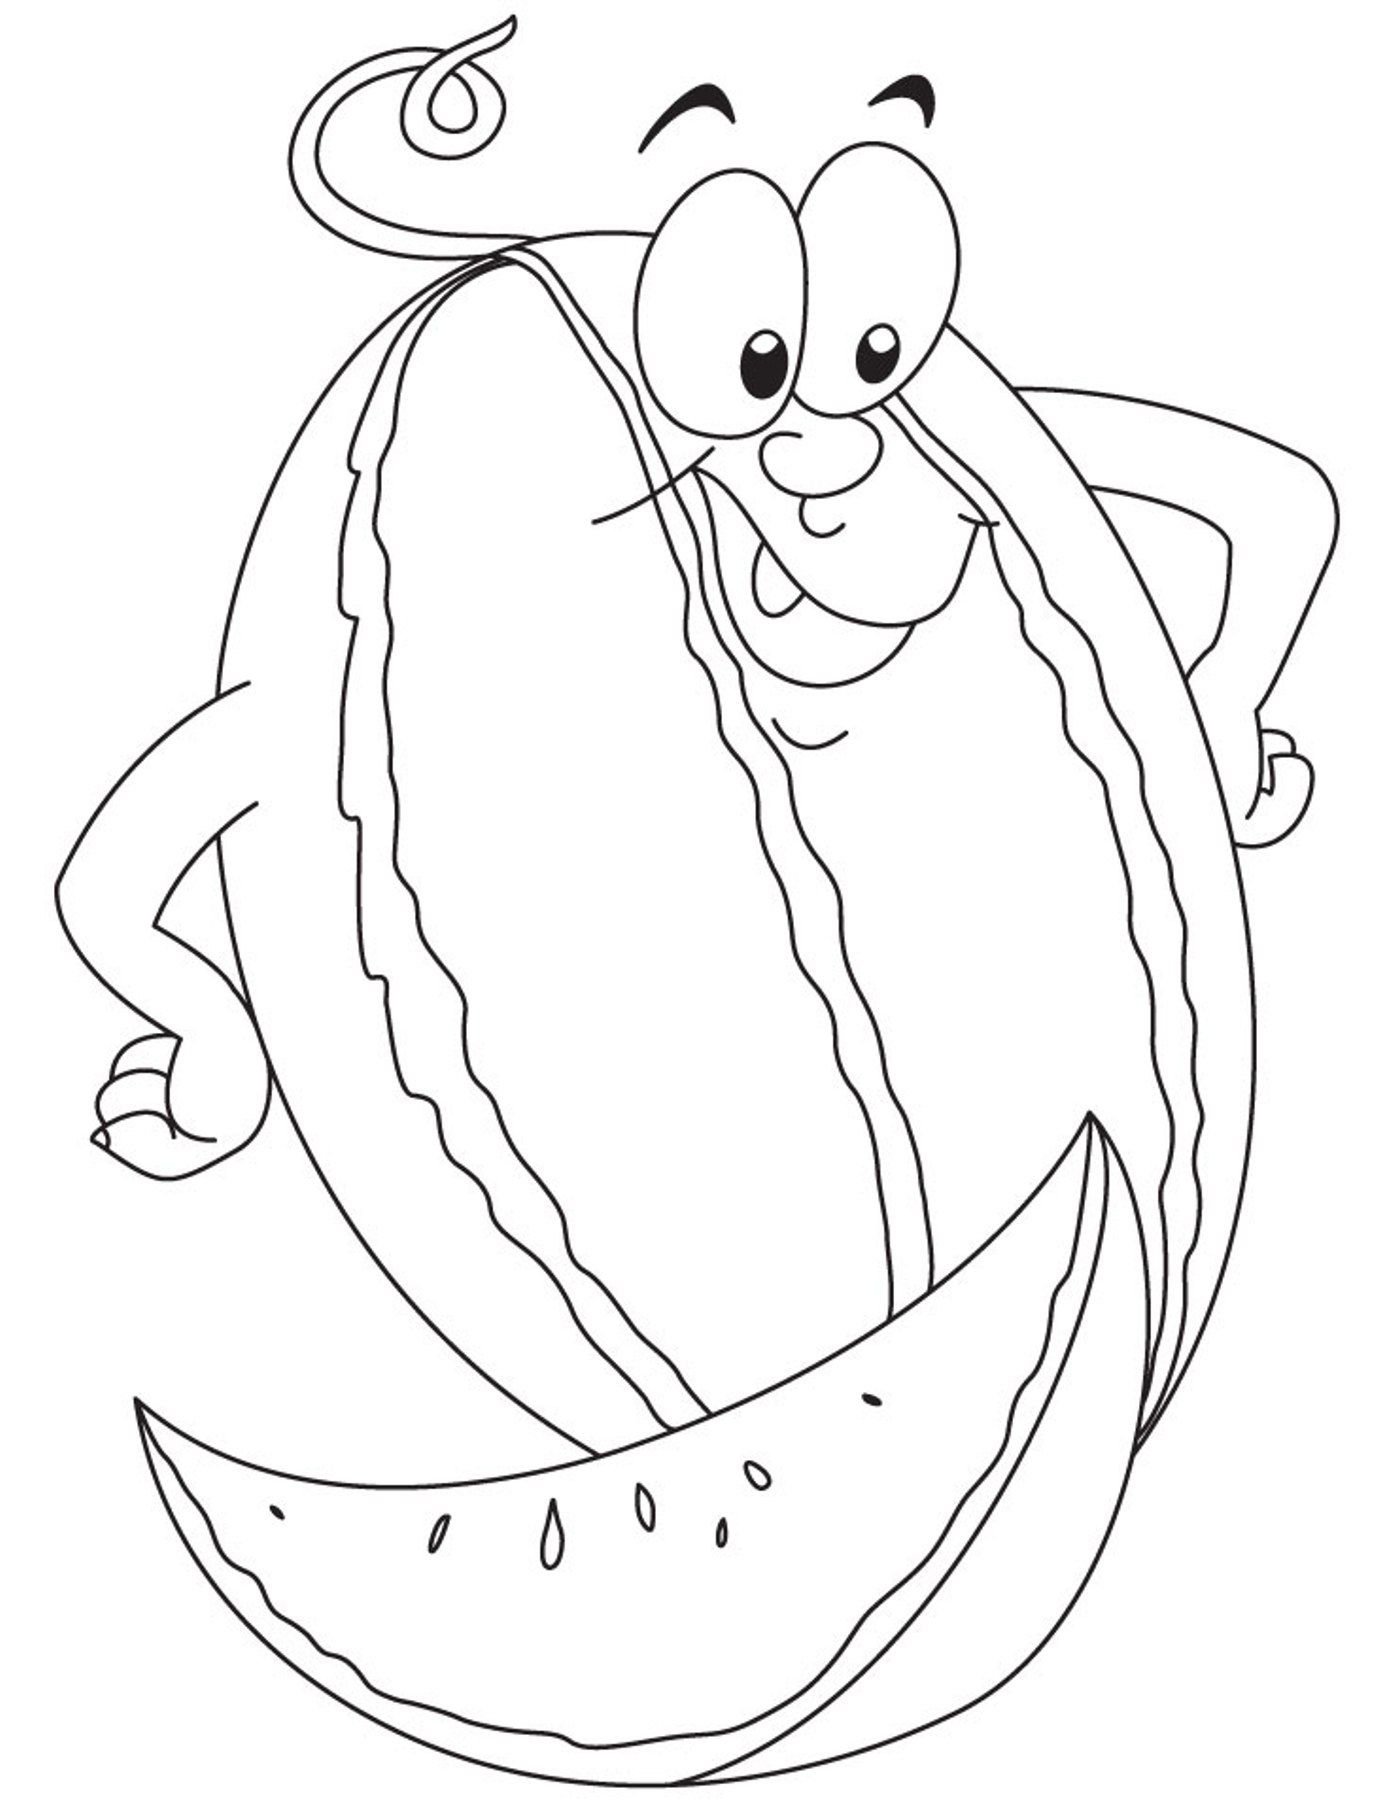 W Is For Watermelon Coloring Pages - High Quality Coloring Pages